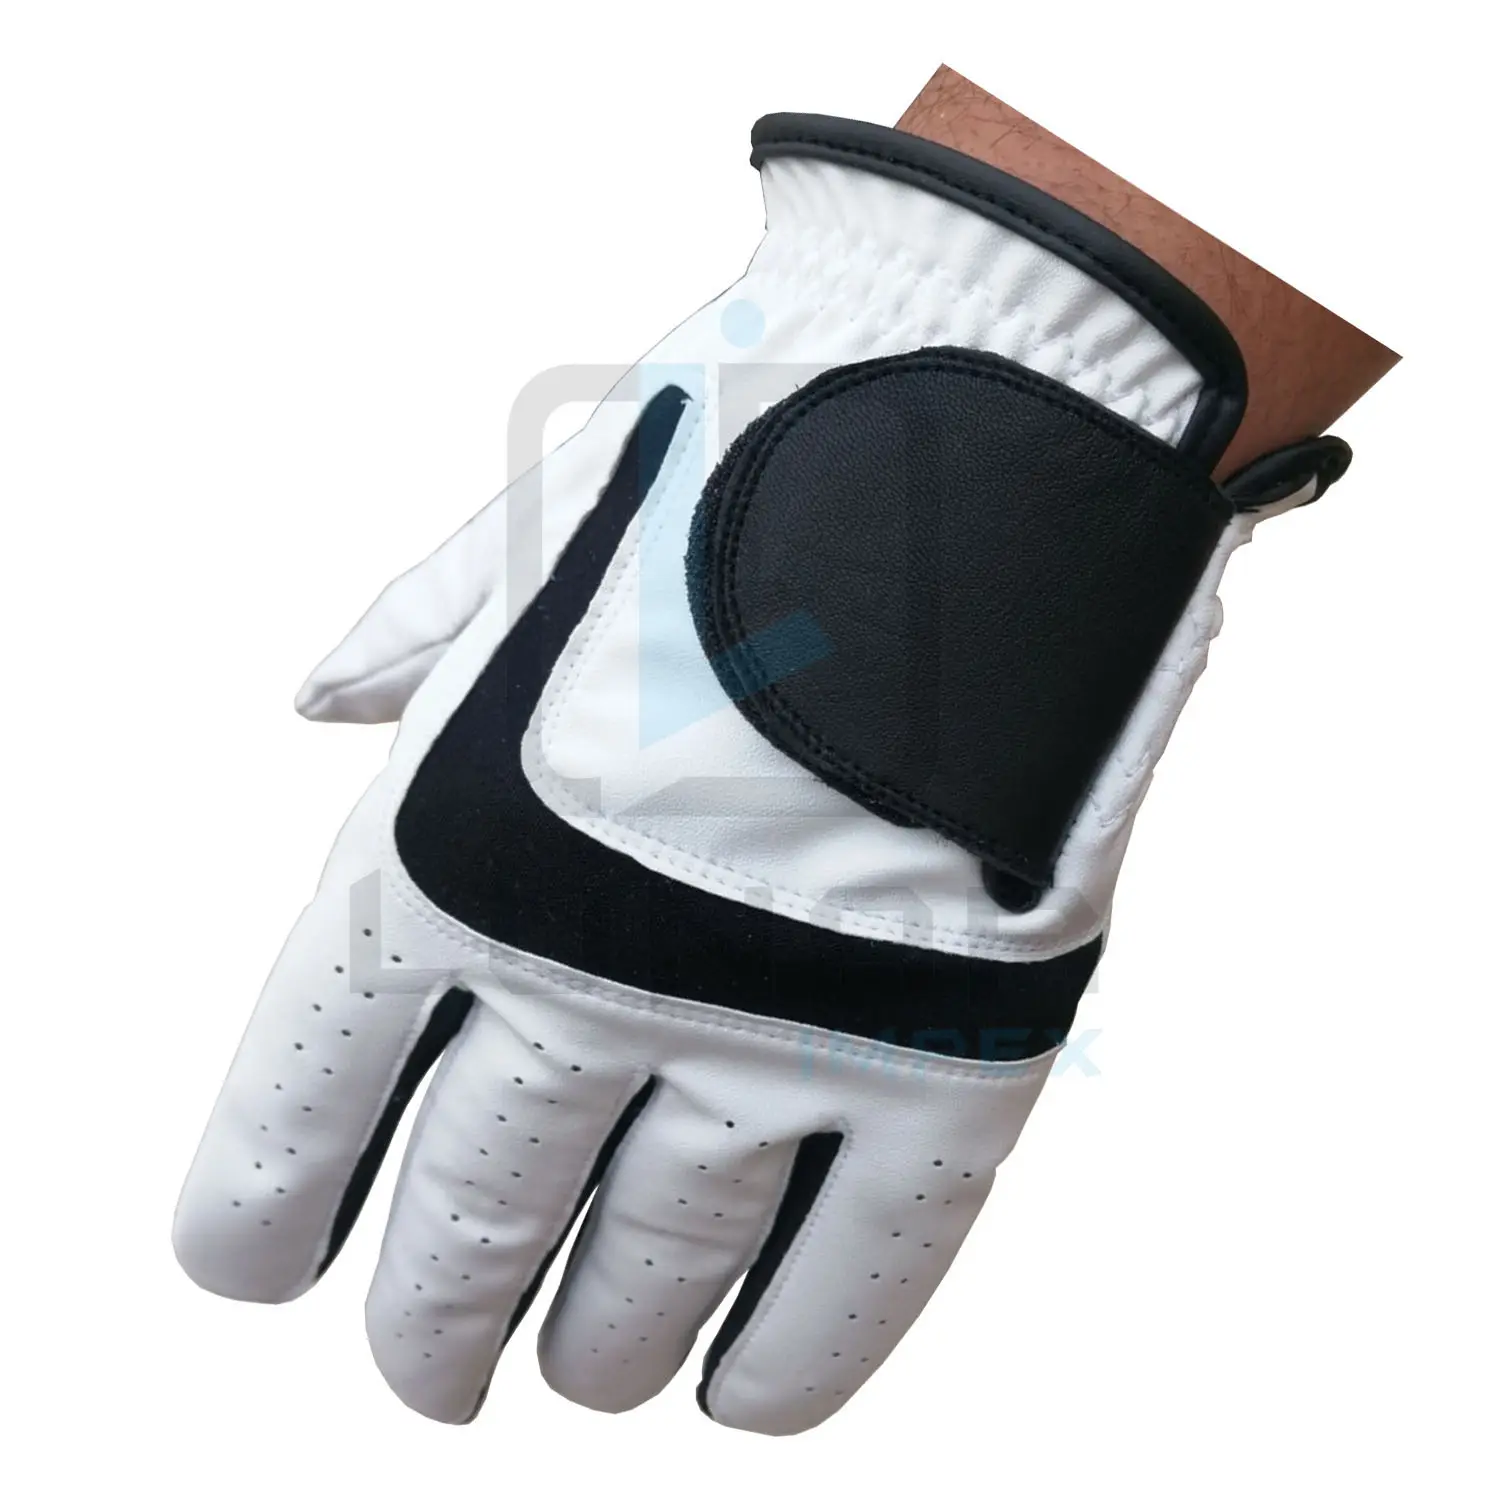 Wholesale Non-Slip High Quality Left Handed Comfortable Genuine Leather Golf Gloves With Customized Logo And Color